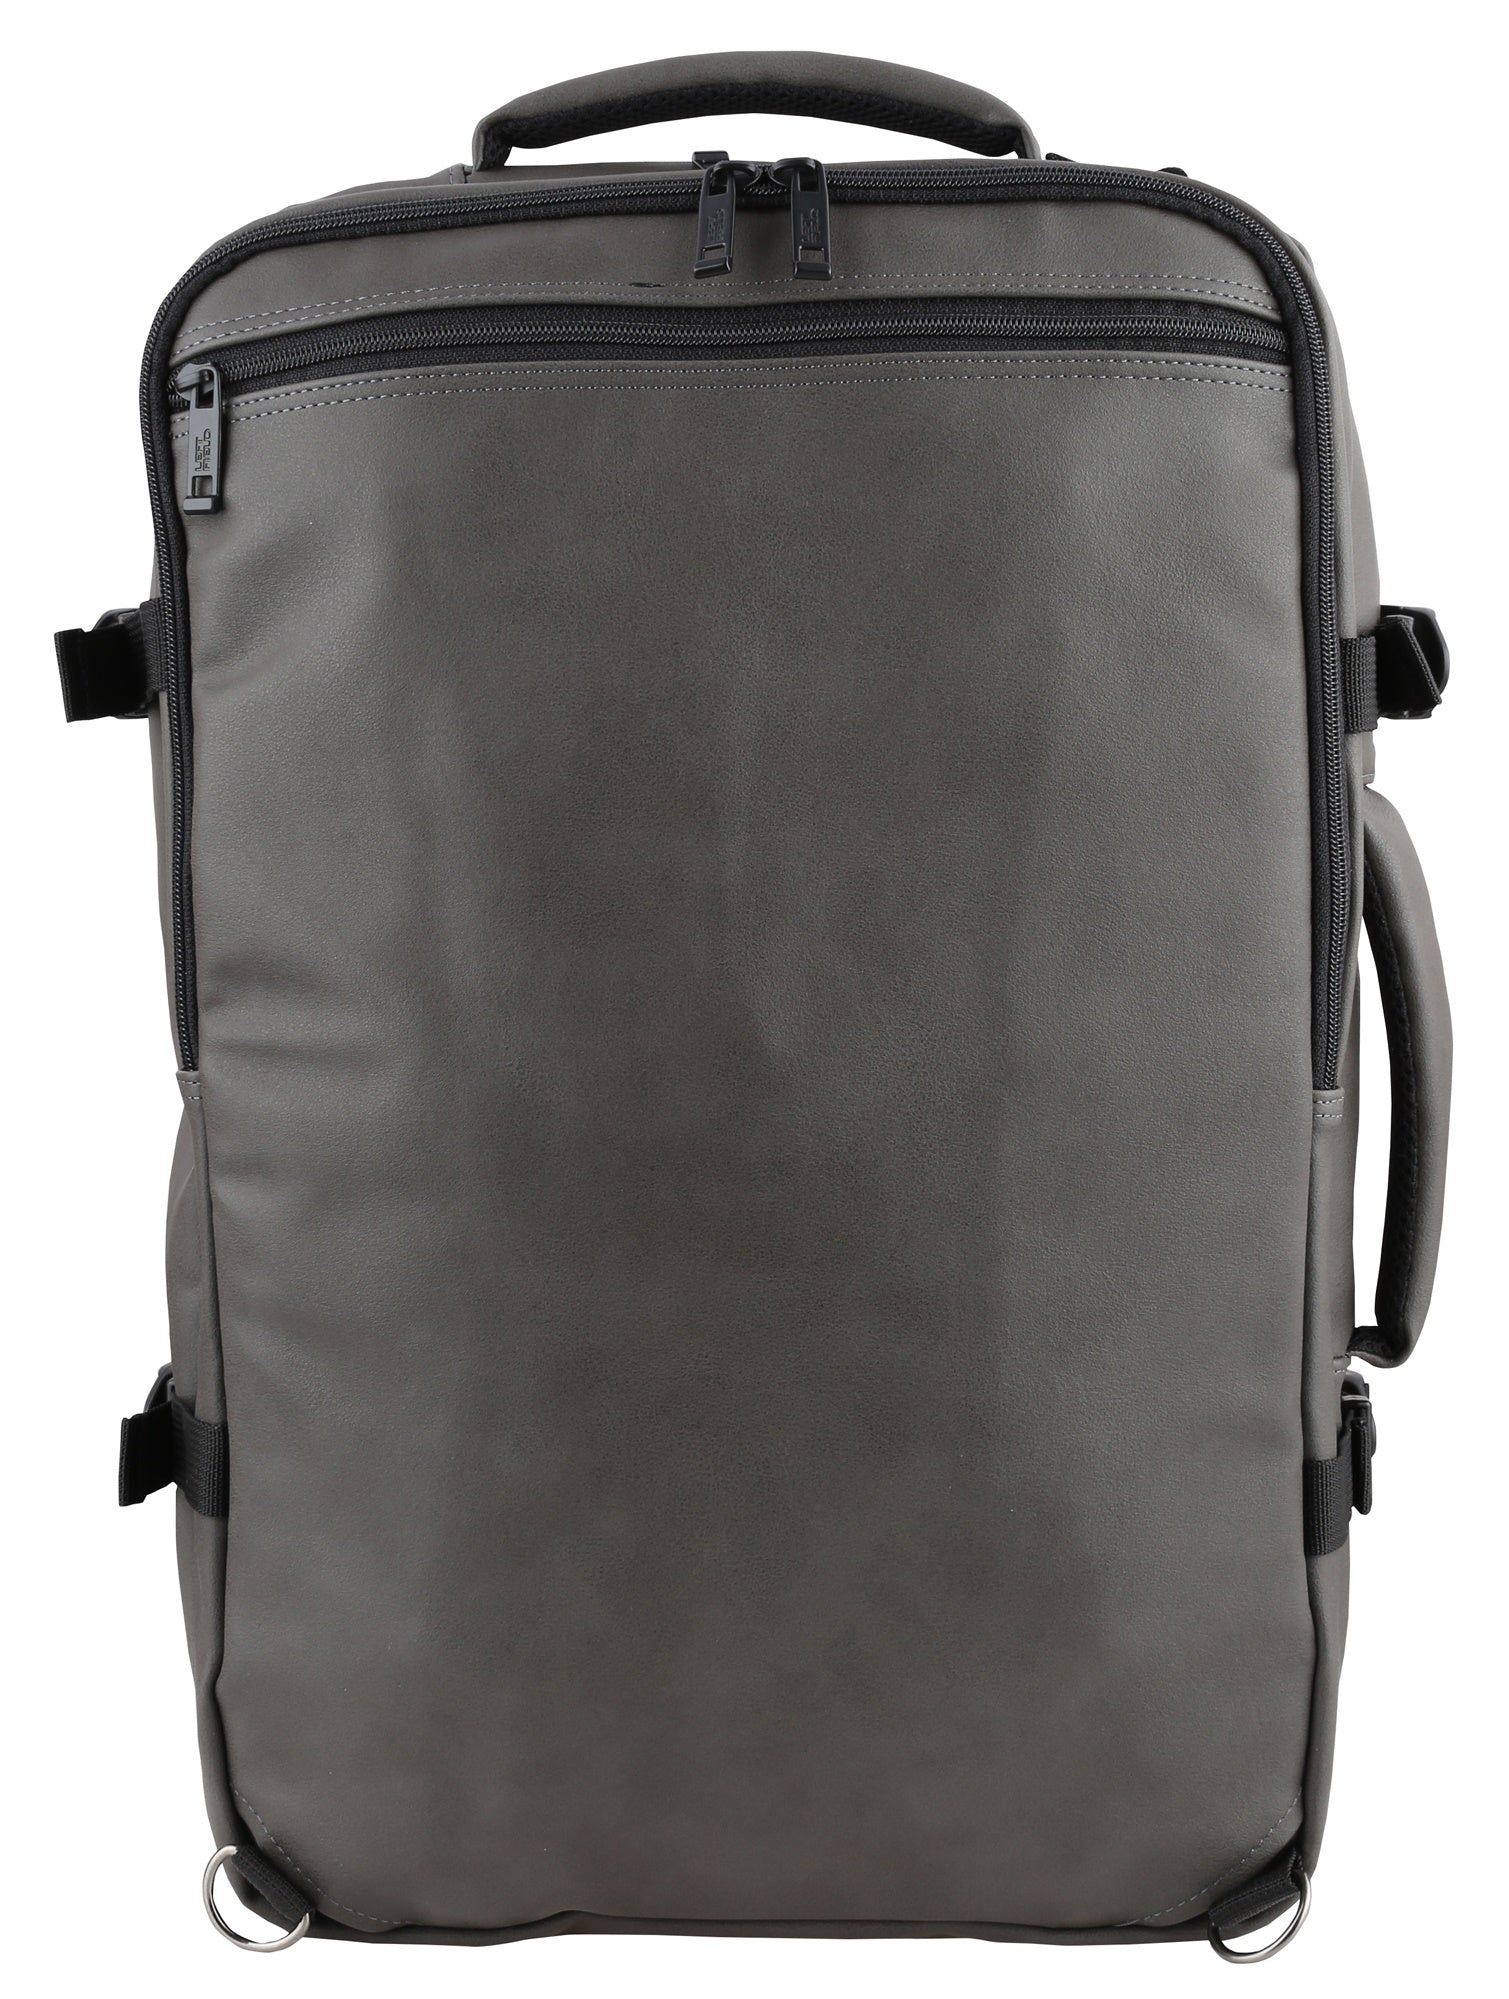 Grey Multi Synthetic Leather Suqare Laptop Backpacks